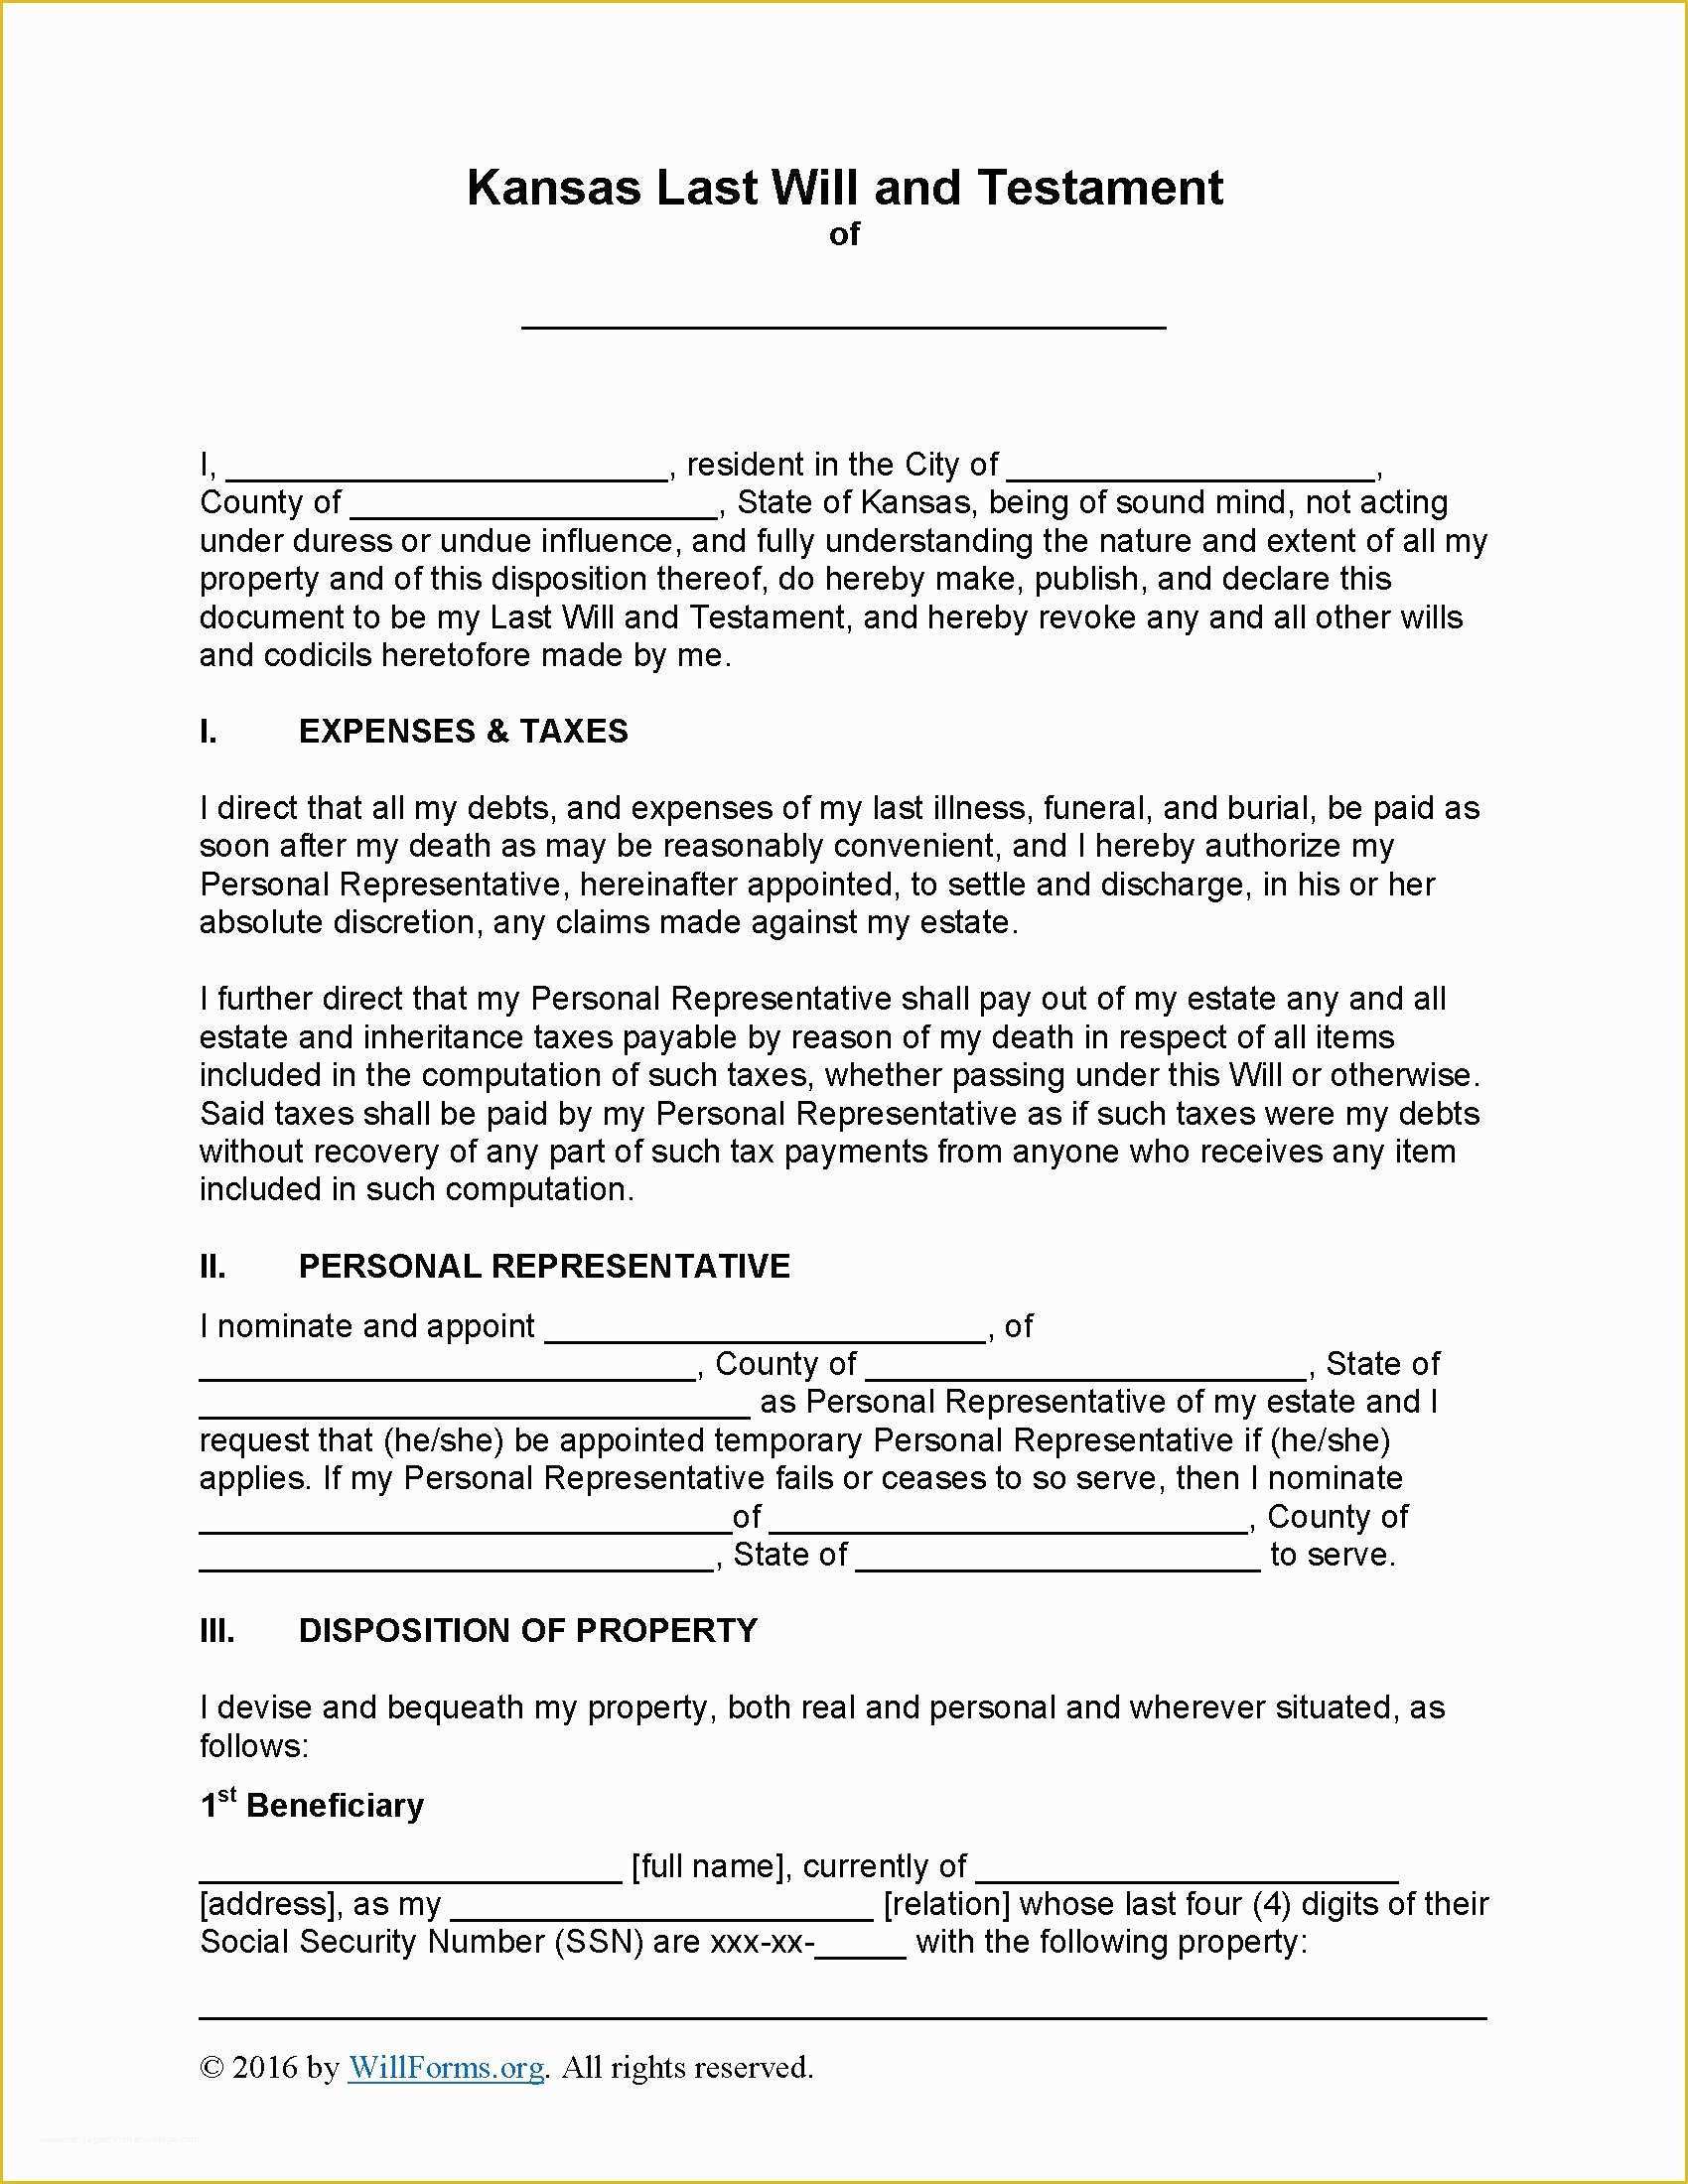 California Last Will and Testament Free Template Of Kansas Last Will and Testament form Will forms Will forms